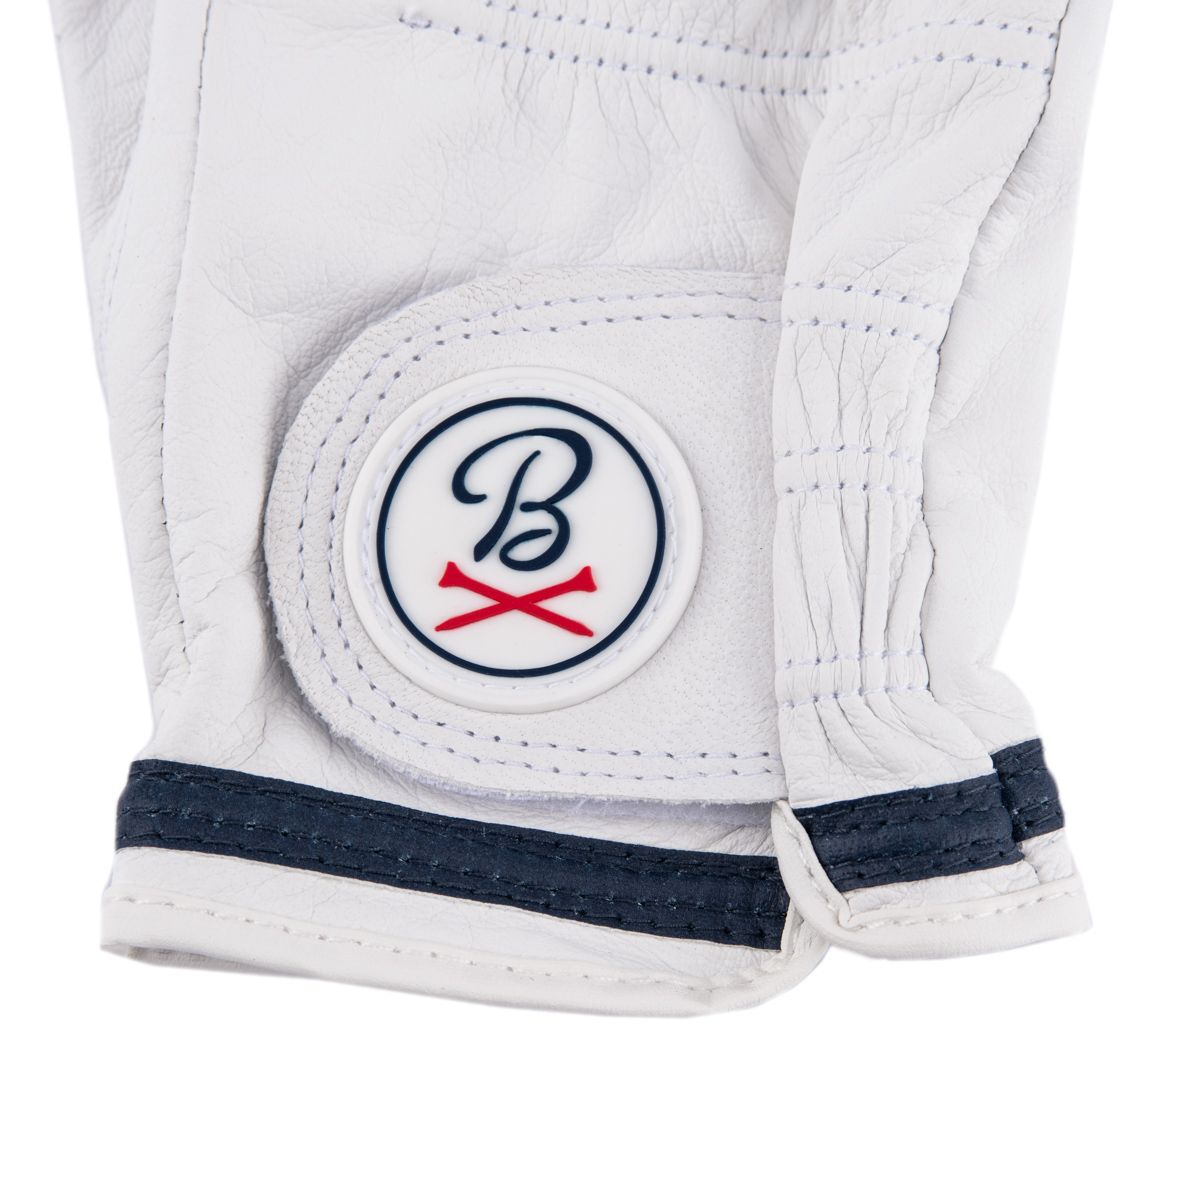 Barstool Golf Glove-Golf Accessories-Fore Play-Barstool Sports